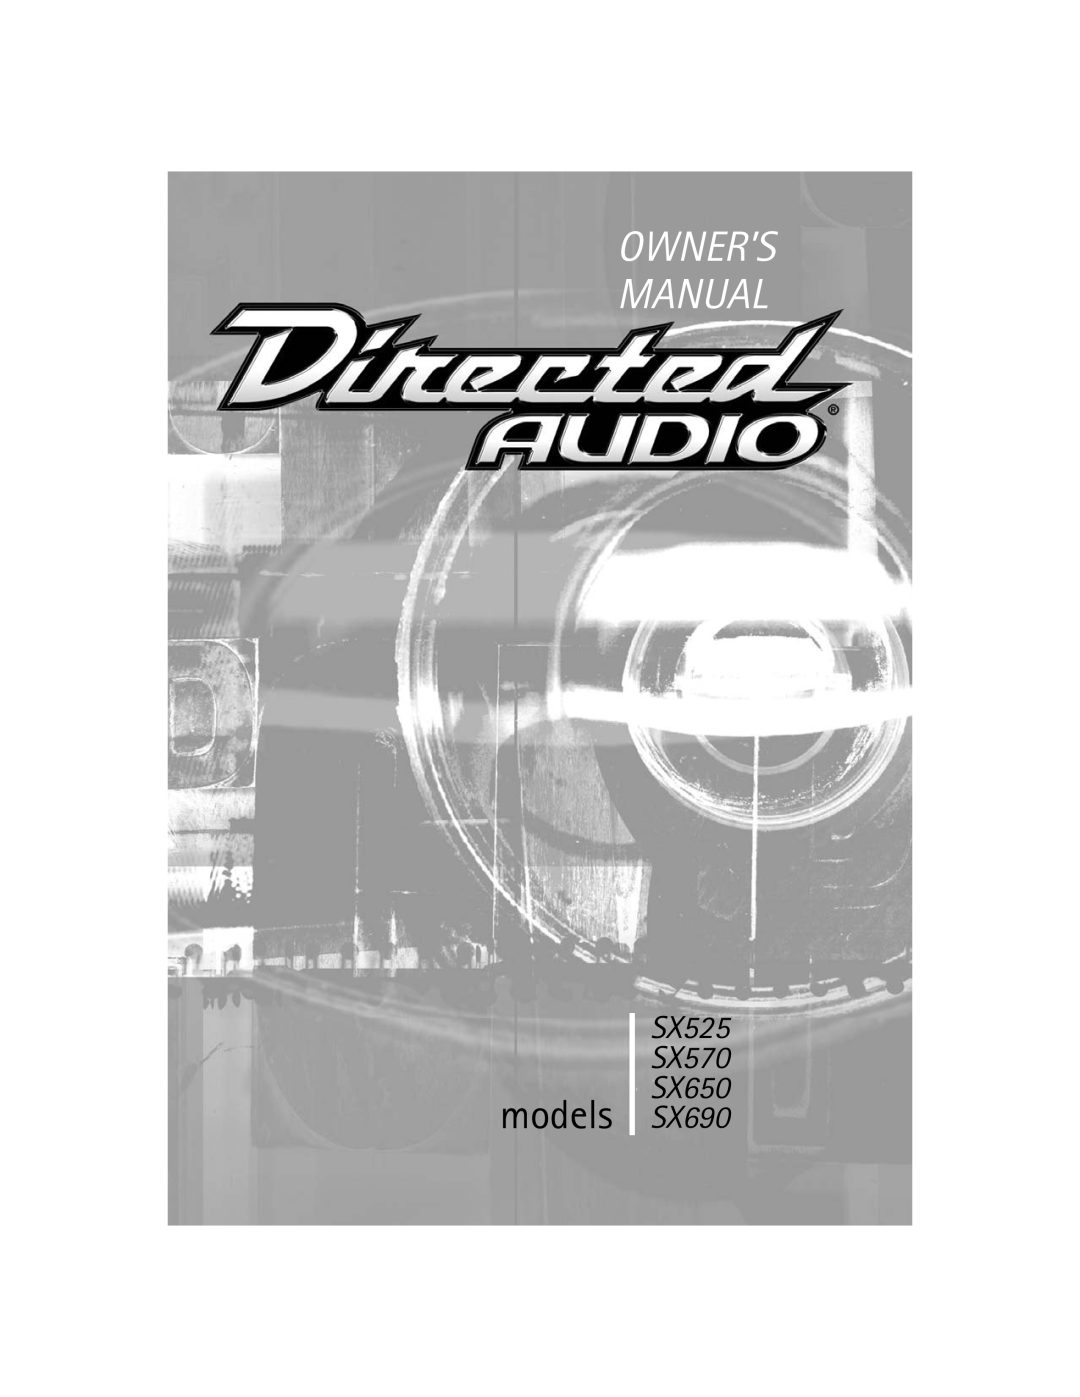 Directed Audio owner manual models, Owner’S Manual, SX525 SX570 SX650 SX690 